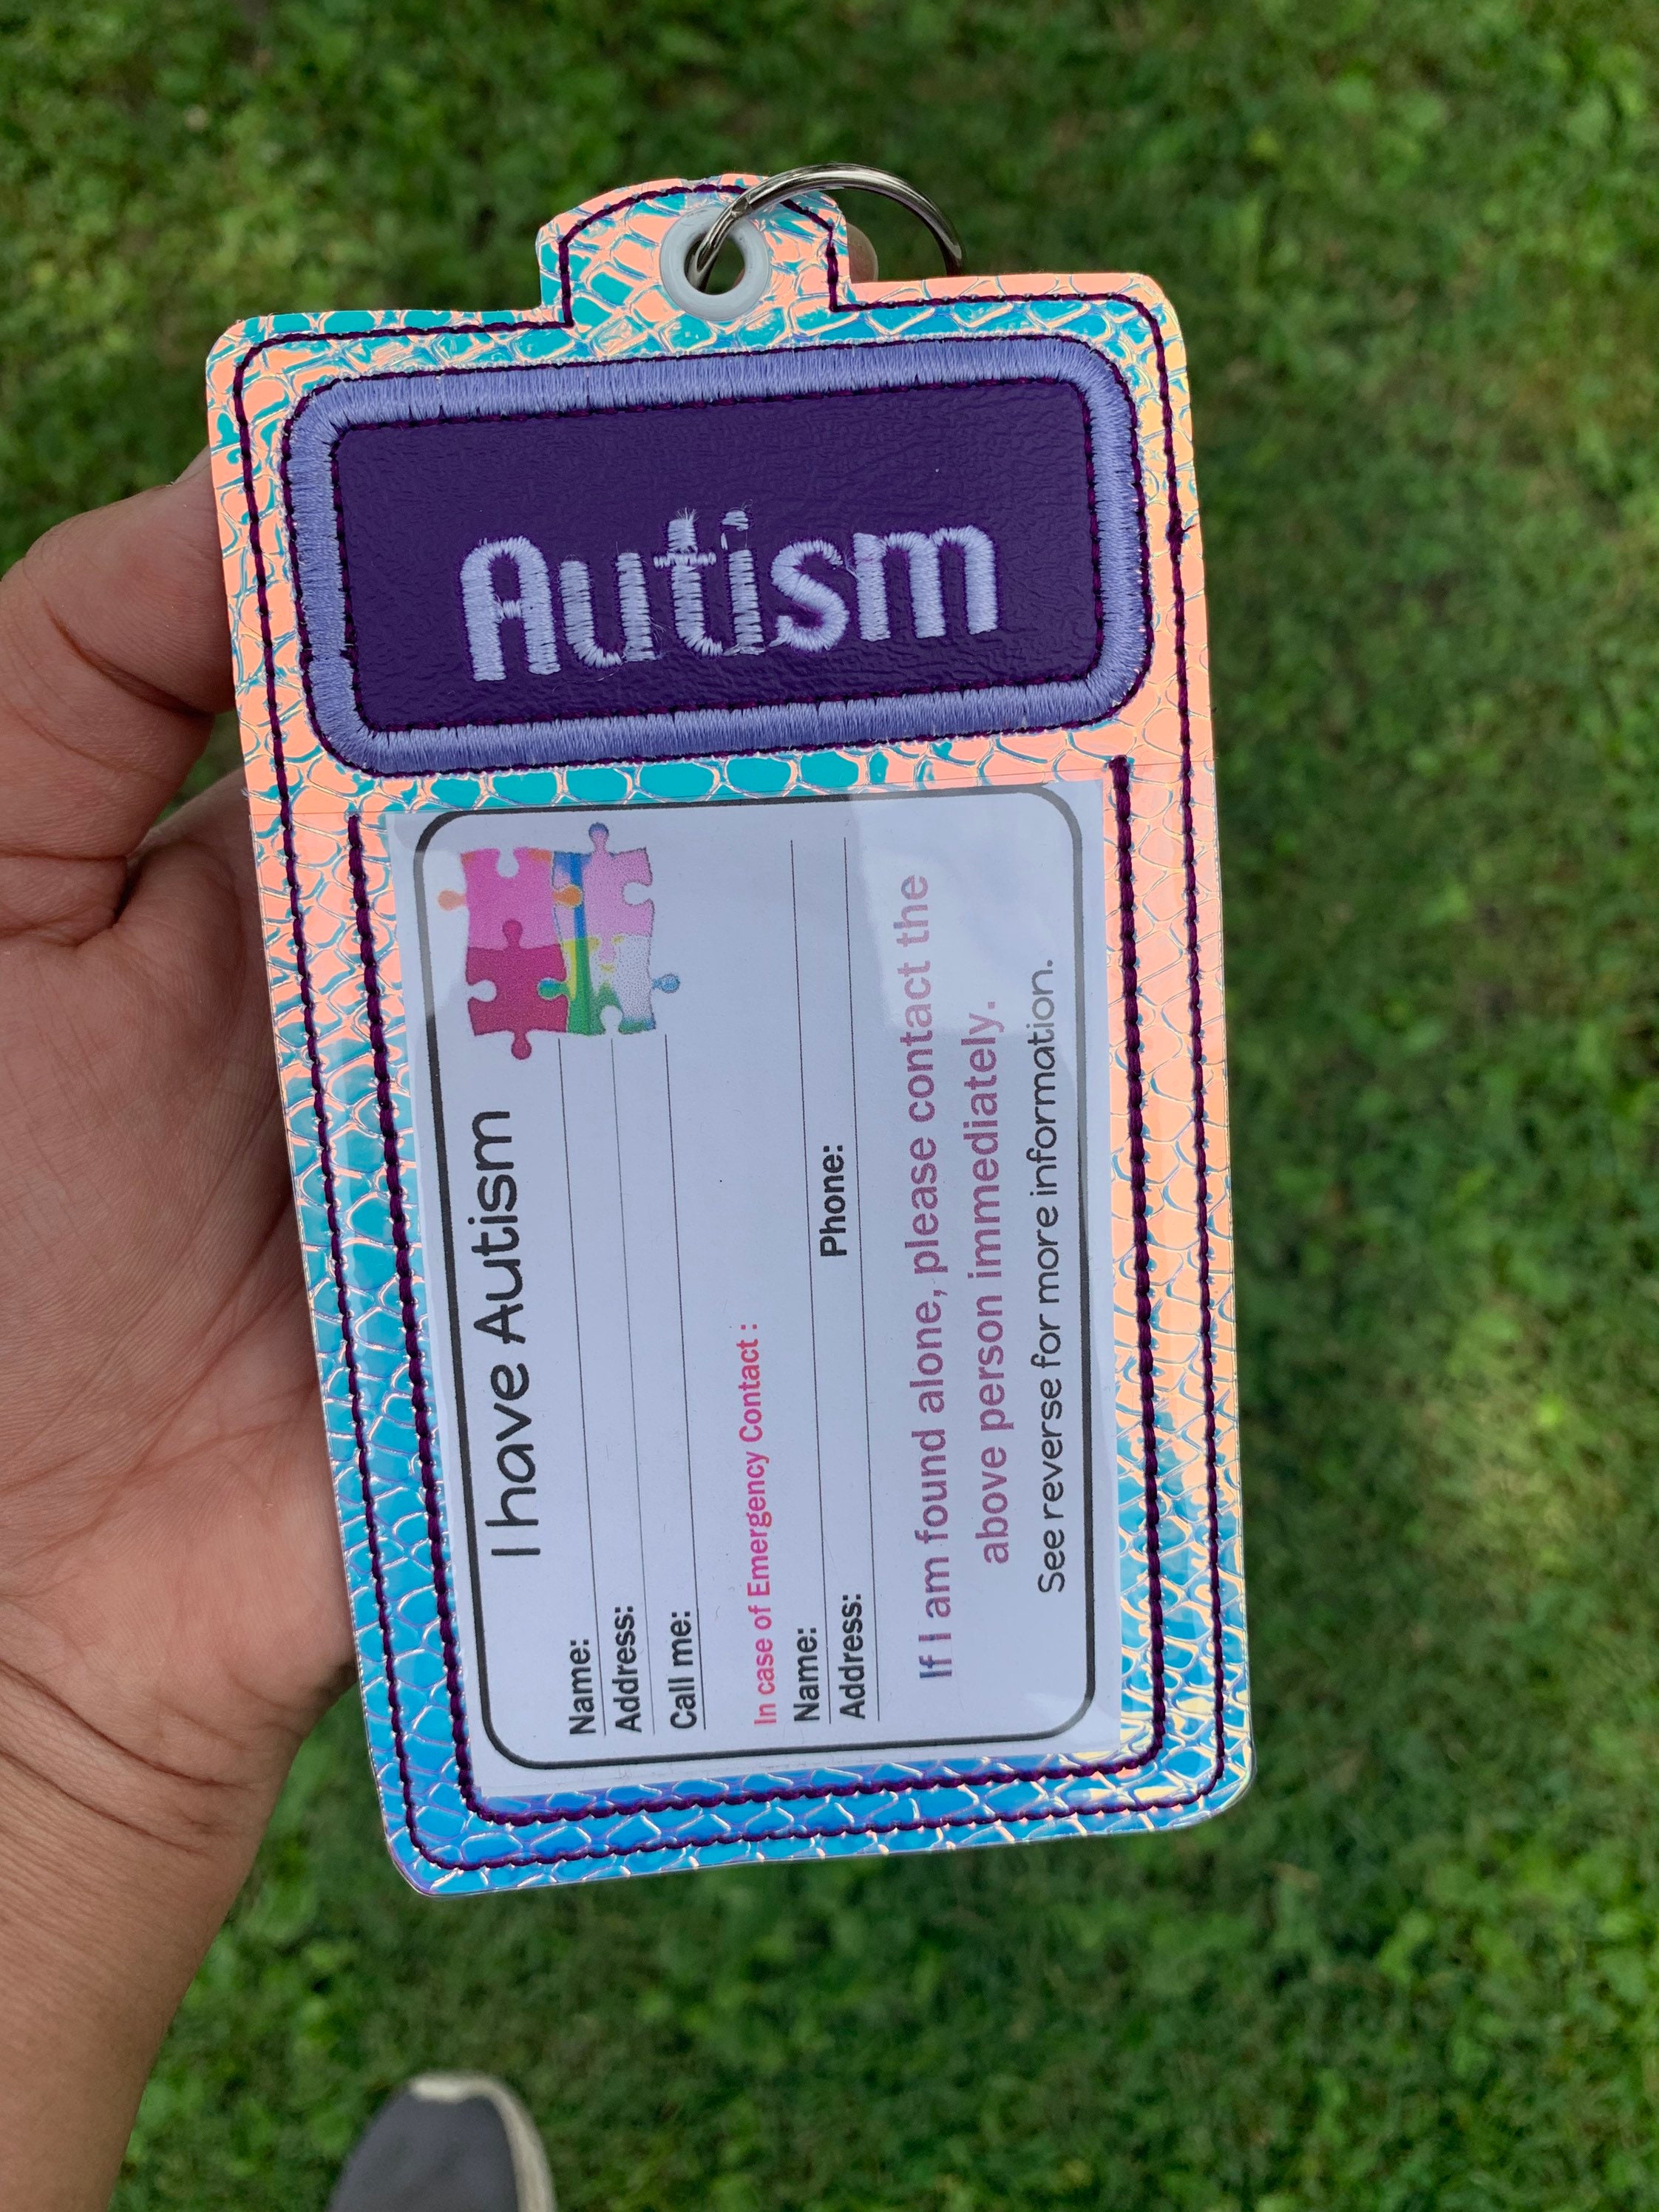 autism-id-card-autism-emergency-card-autism-card-holder-etsy